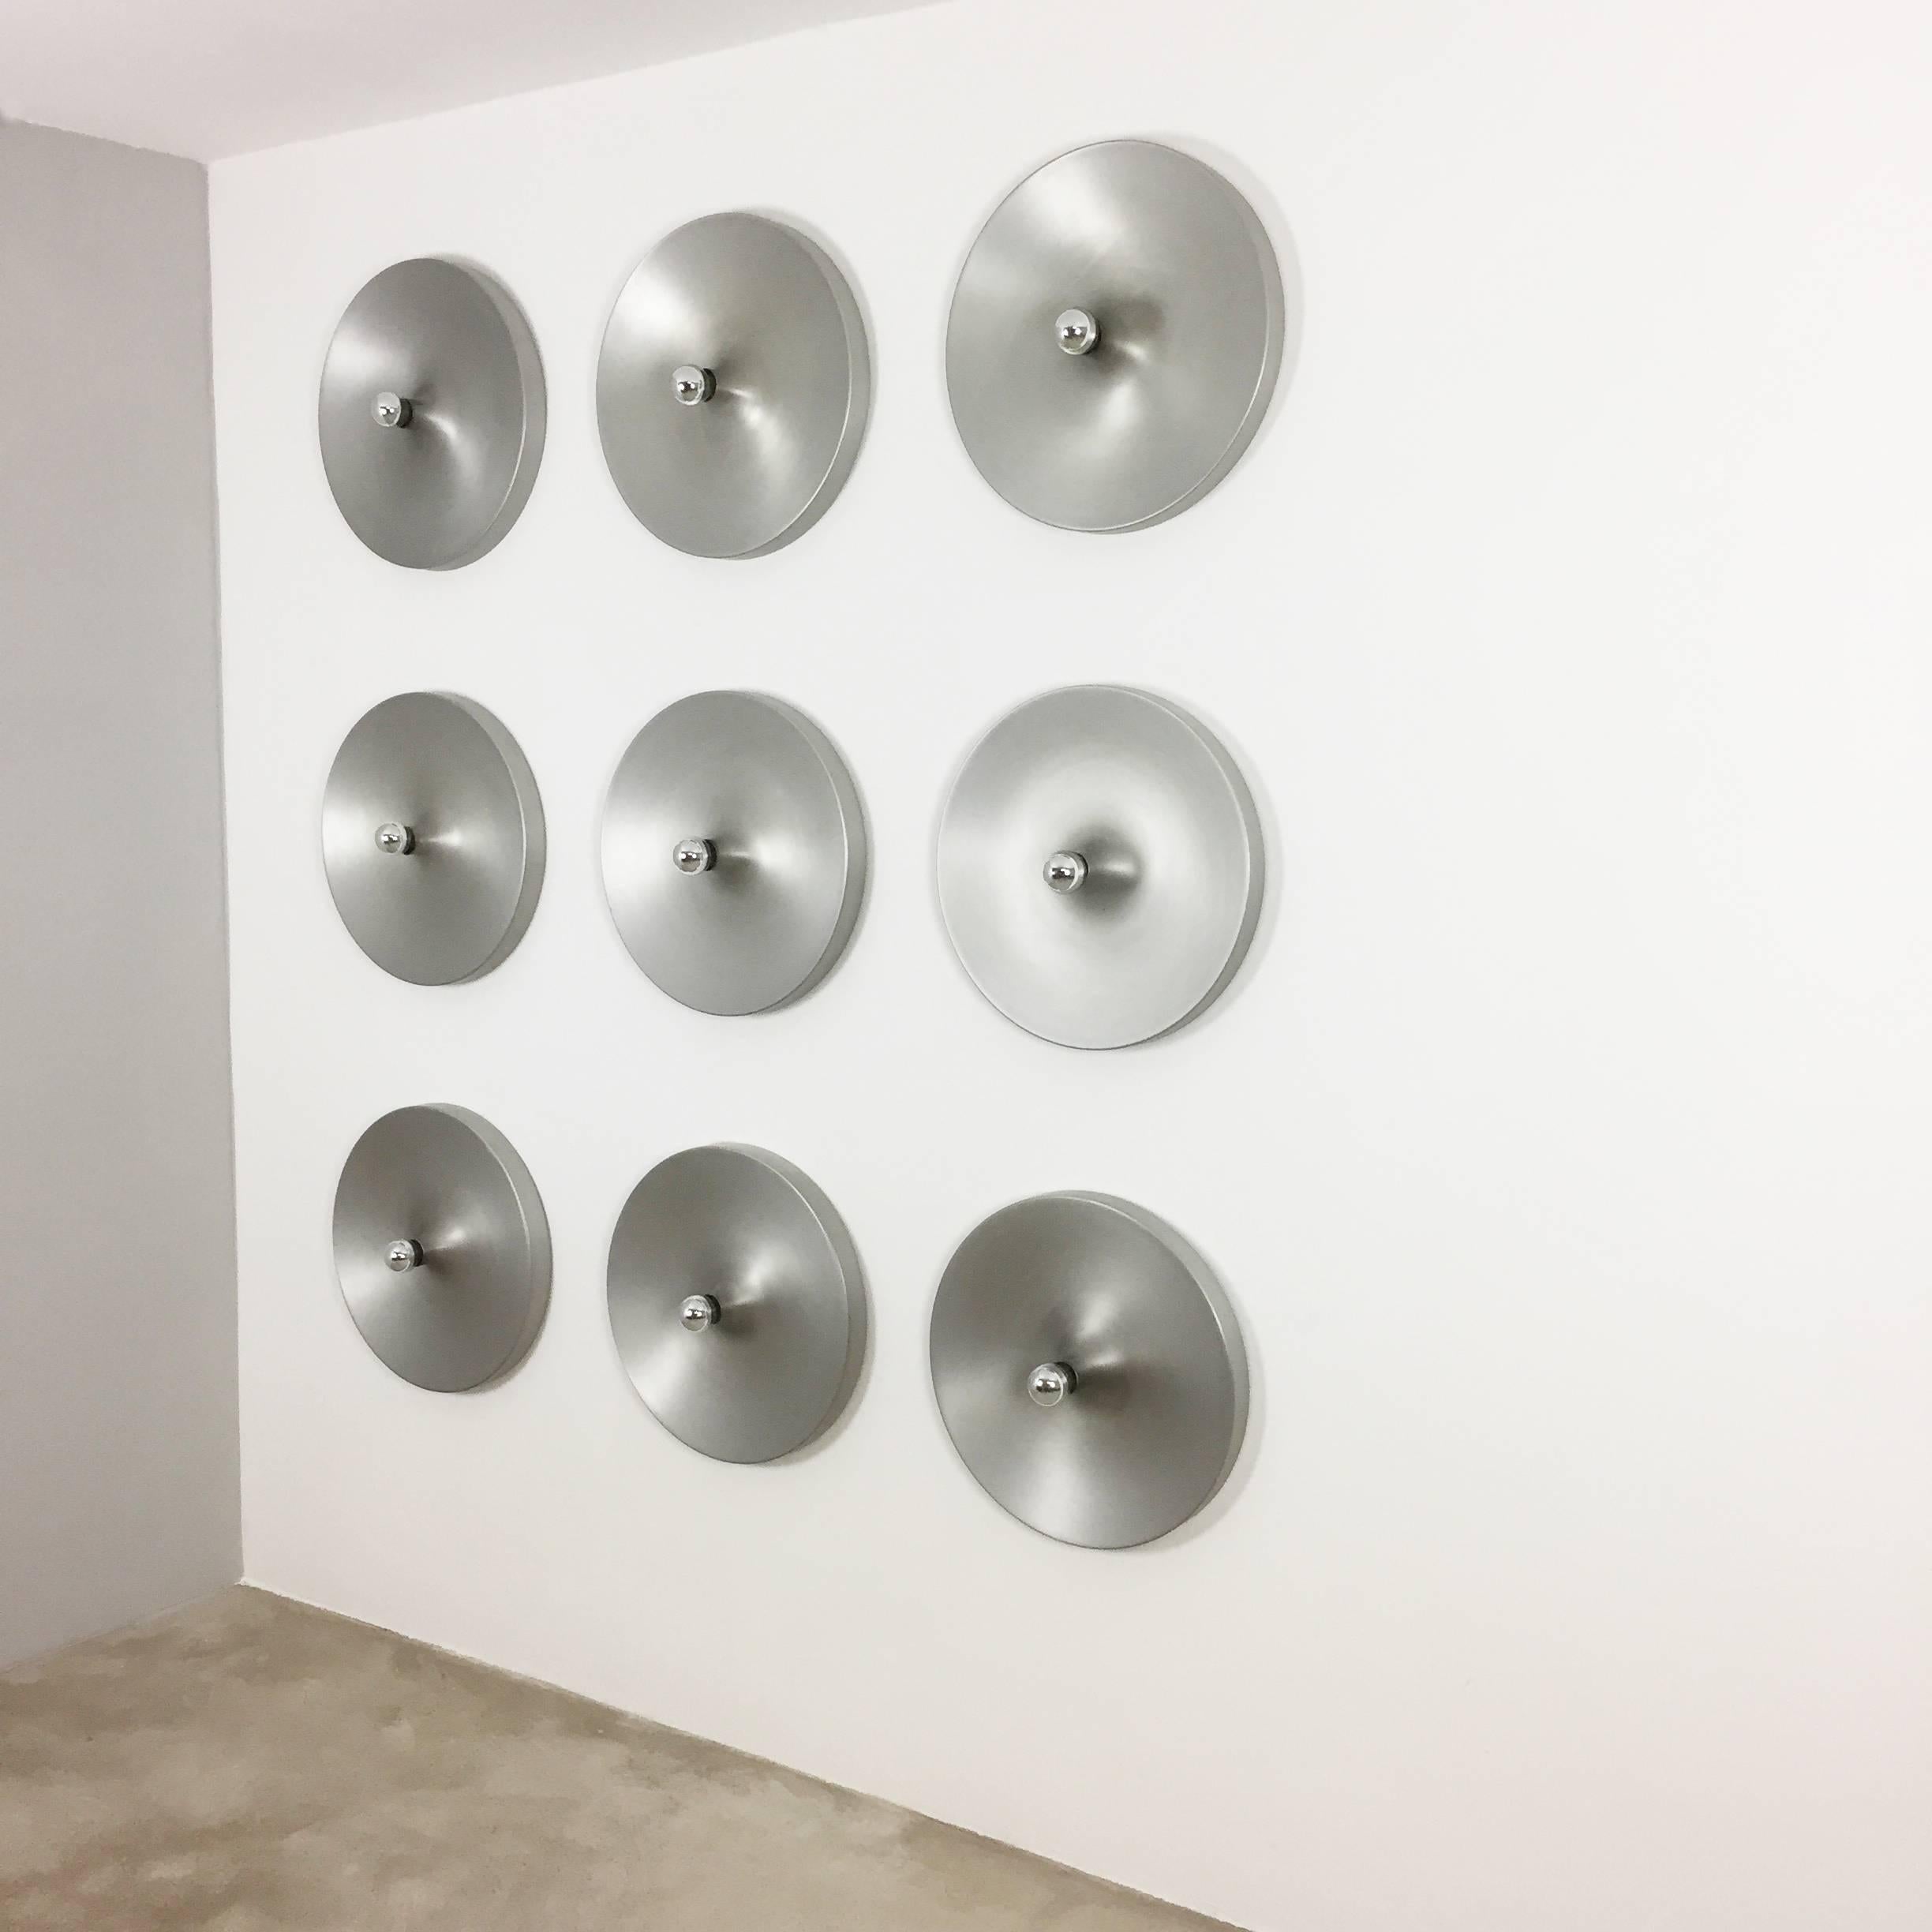 Article:

Extra large wall light sconce set of 9


Producer:

Staff Lights

Origin:

Germany

Age:

1970s

Original 1960s modernist German wall Light made of solid metal. This super rare wall light was produced in the 1960s by Staff